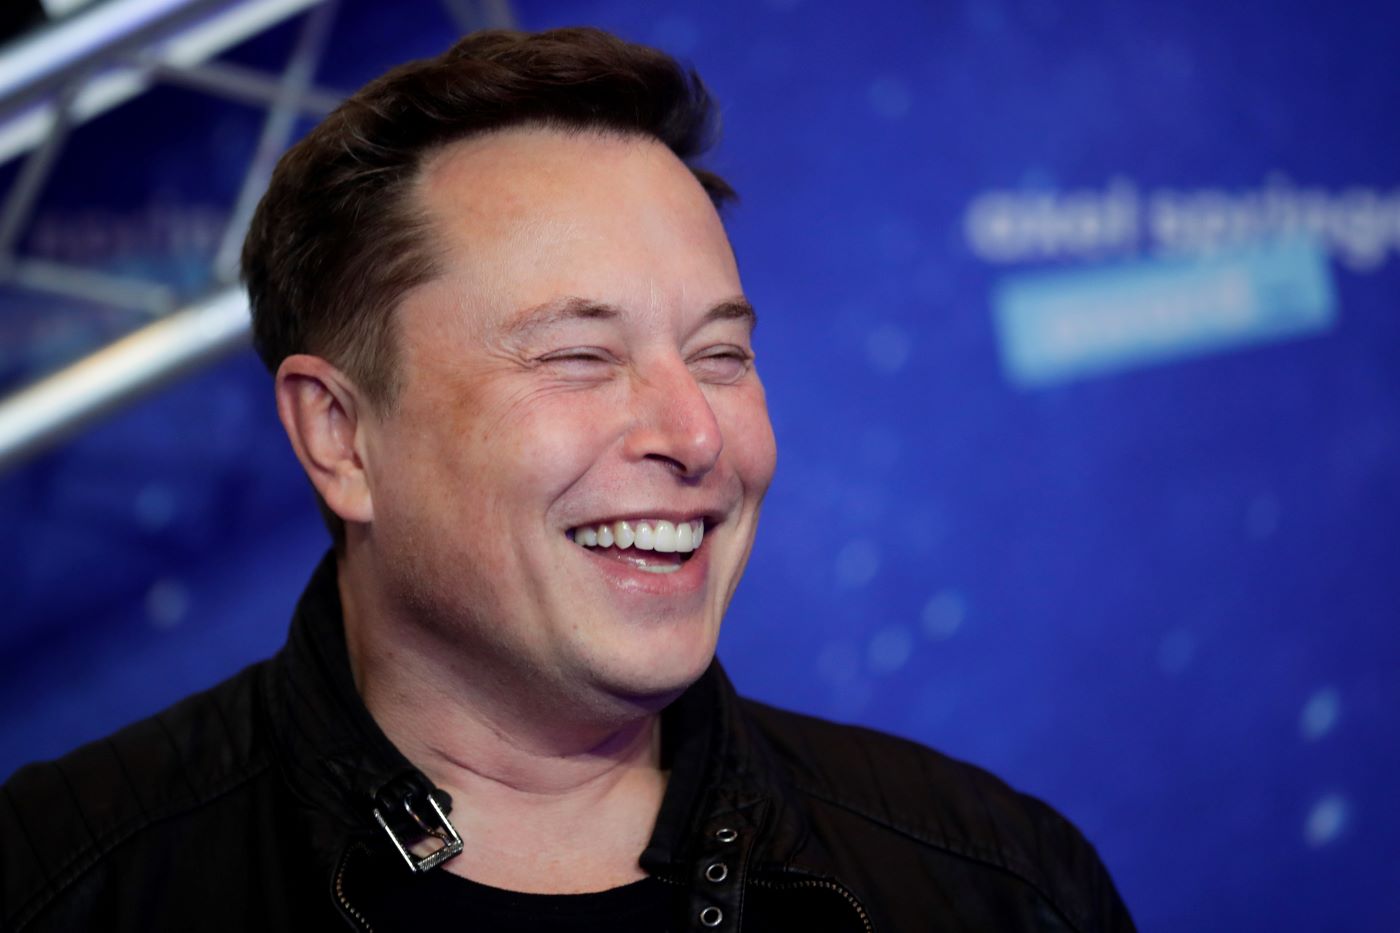 Closeup on Elon Musk's face while smearing wearing a black shirt against a blue background.